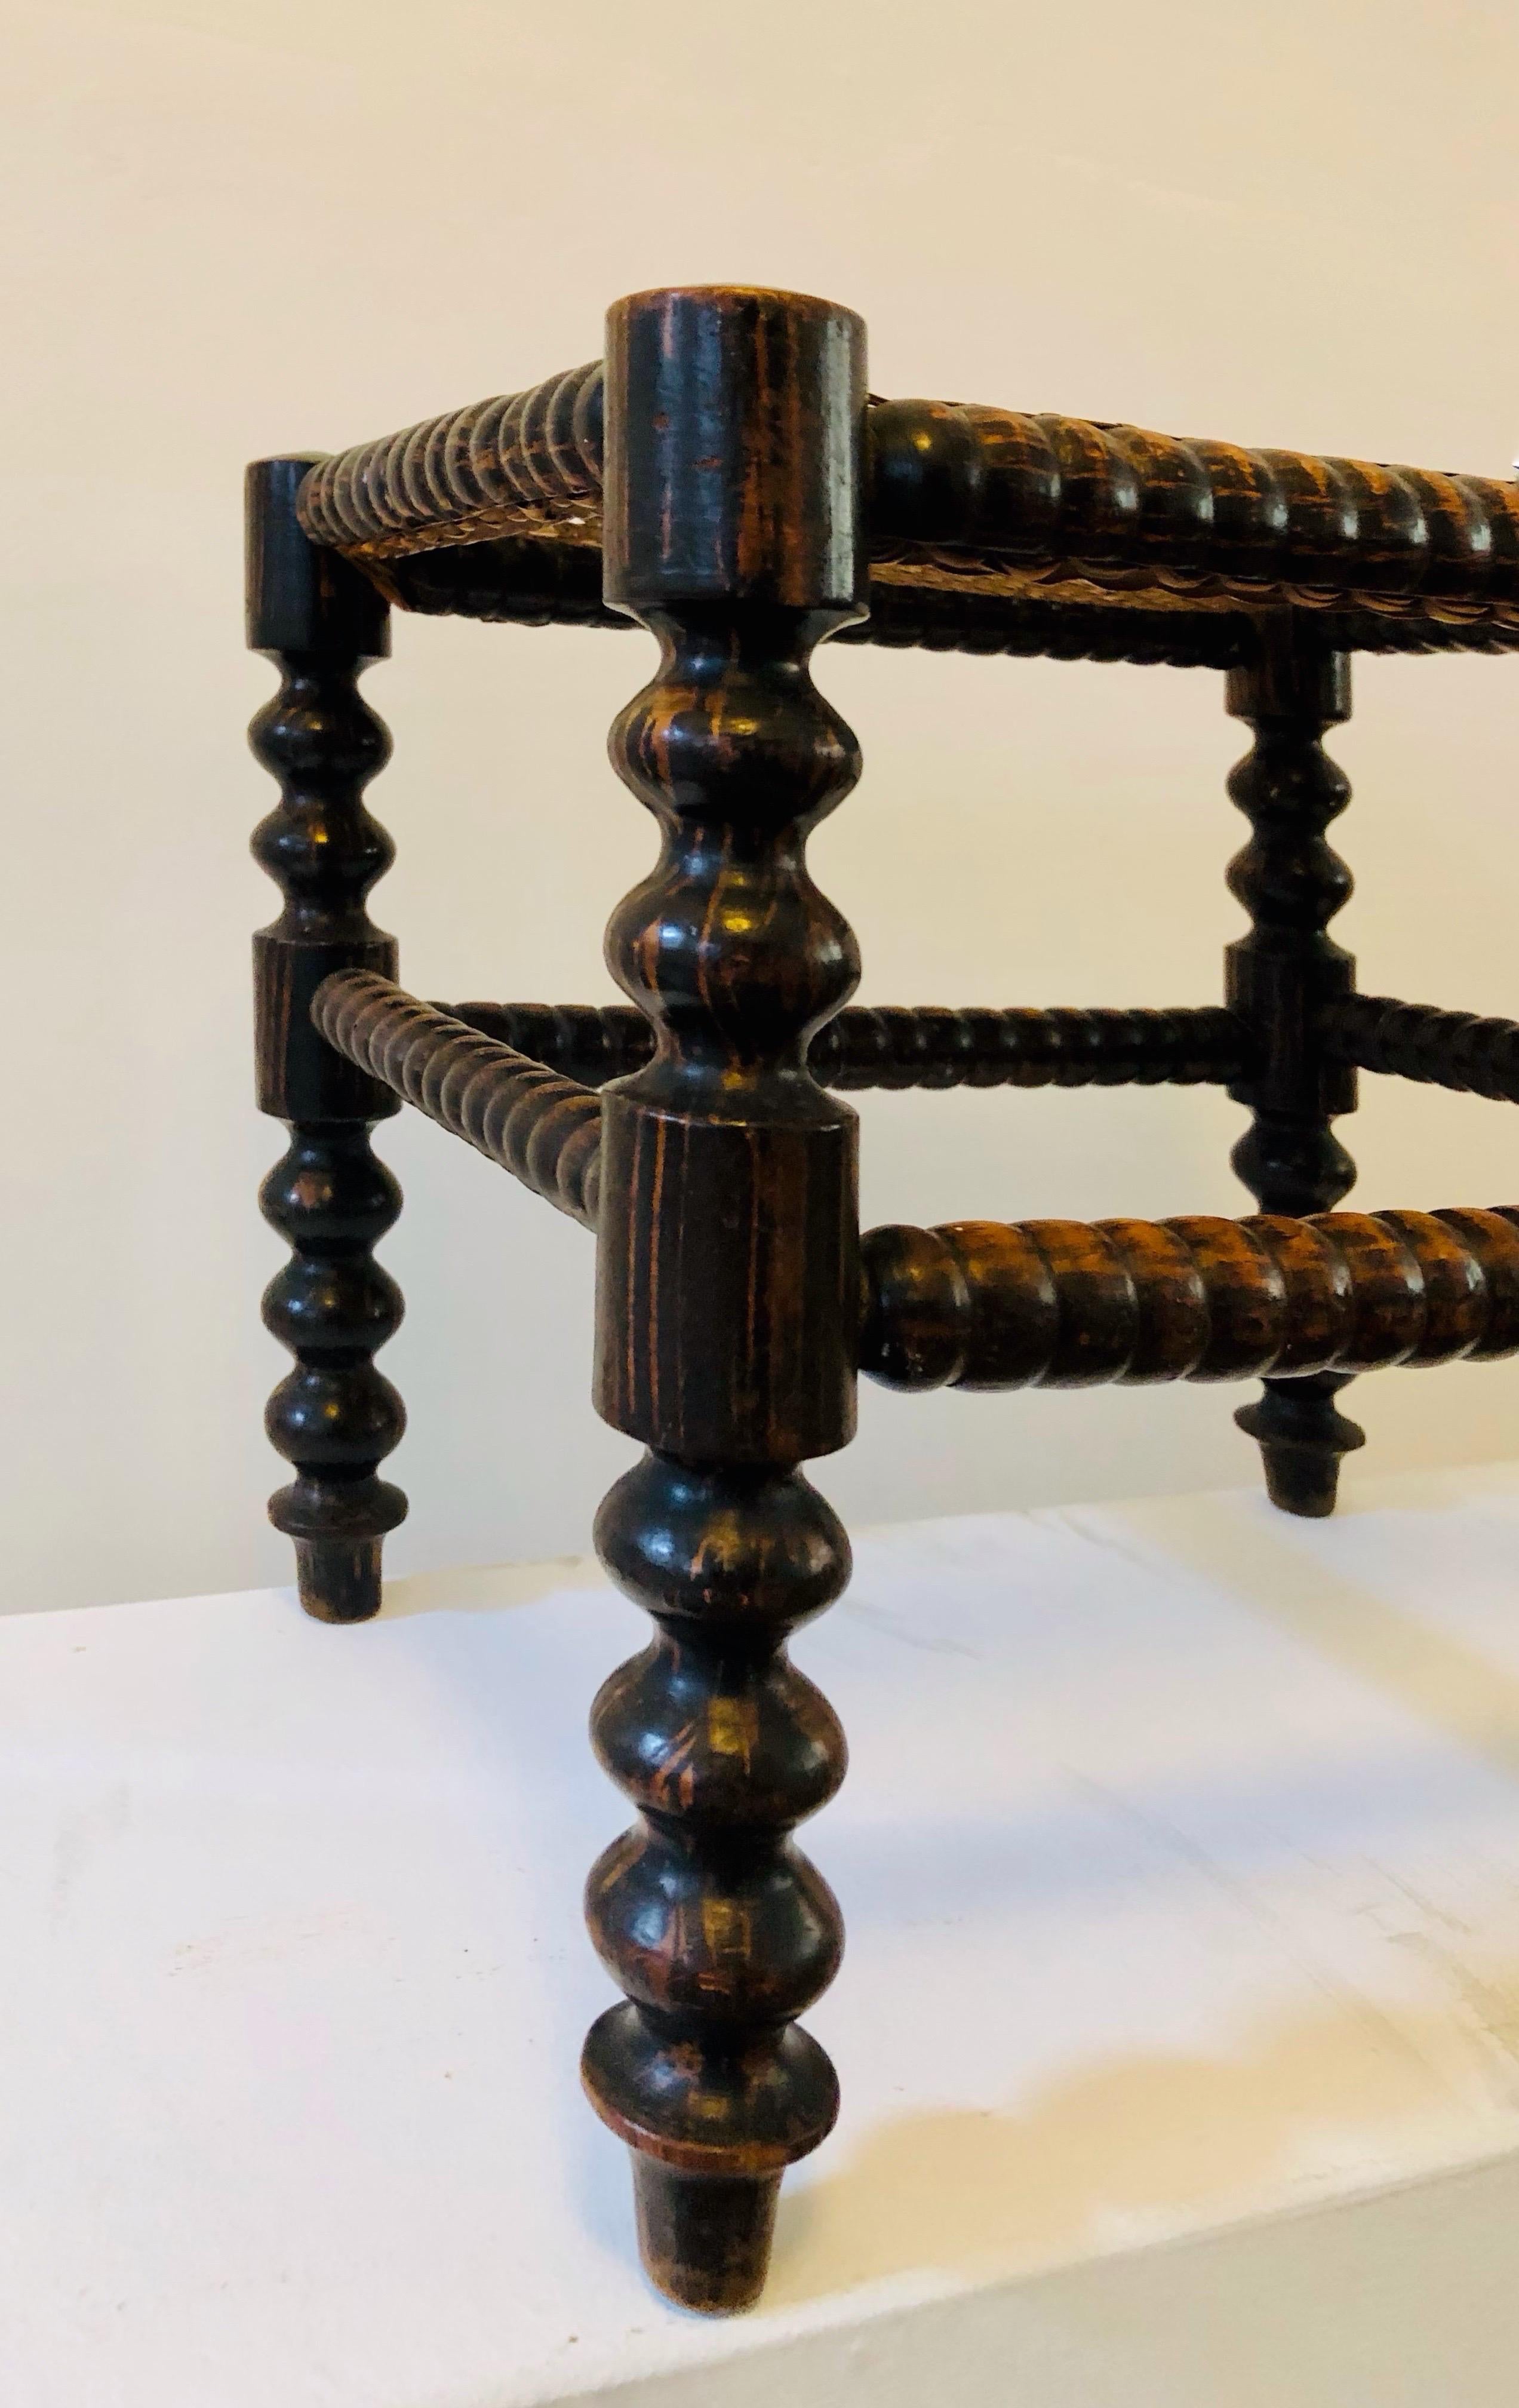 A footrest from the early 20th century, made of solid turned wood and caning. In excellent condition with a beautiful patina.